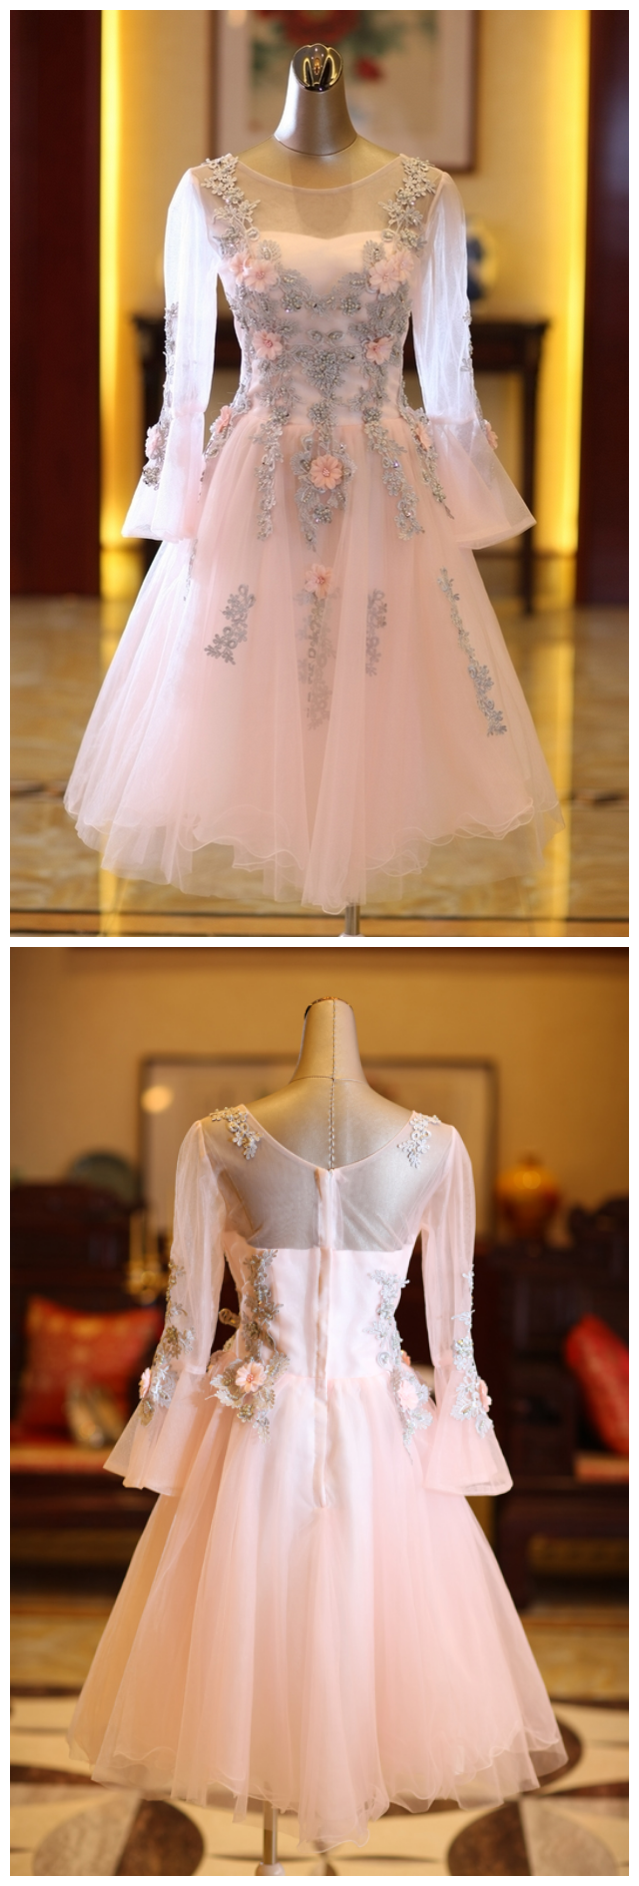 Beautiful Long Sleeves Tulle Short Homecoming Dress,prom Dress